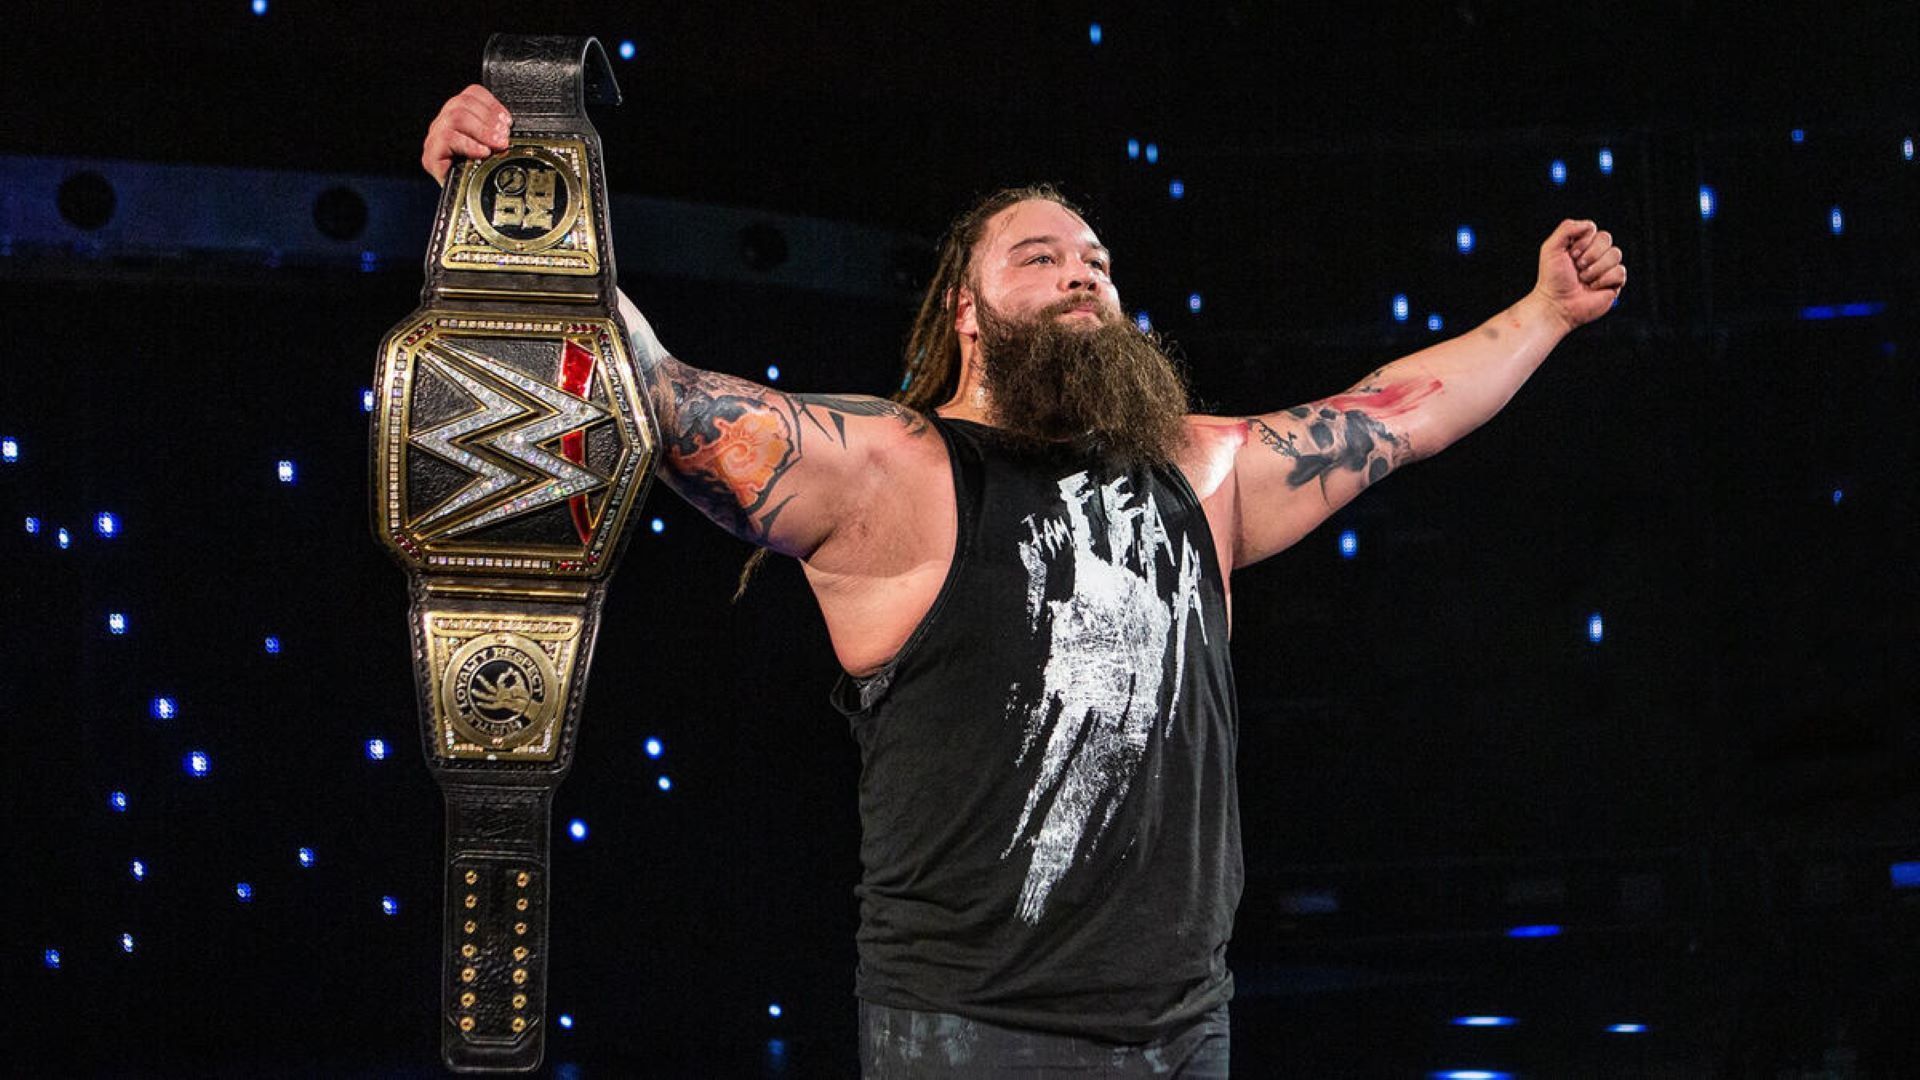 Bray Wyatt won the WWE title but had a short reign as Champion.